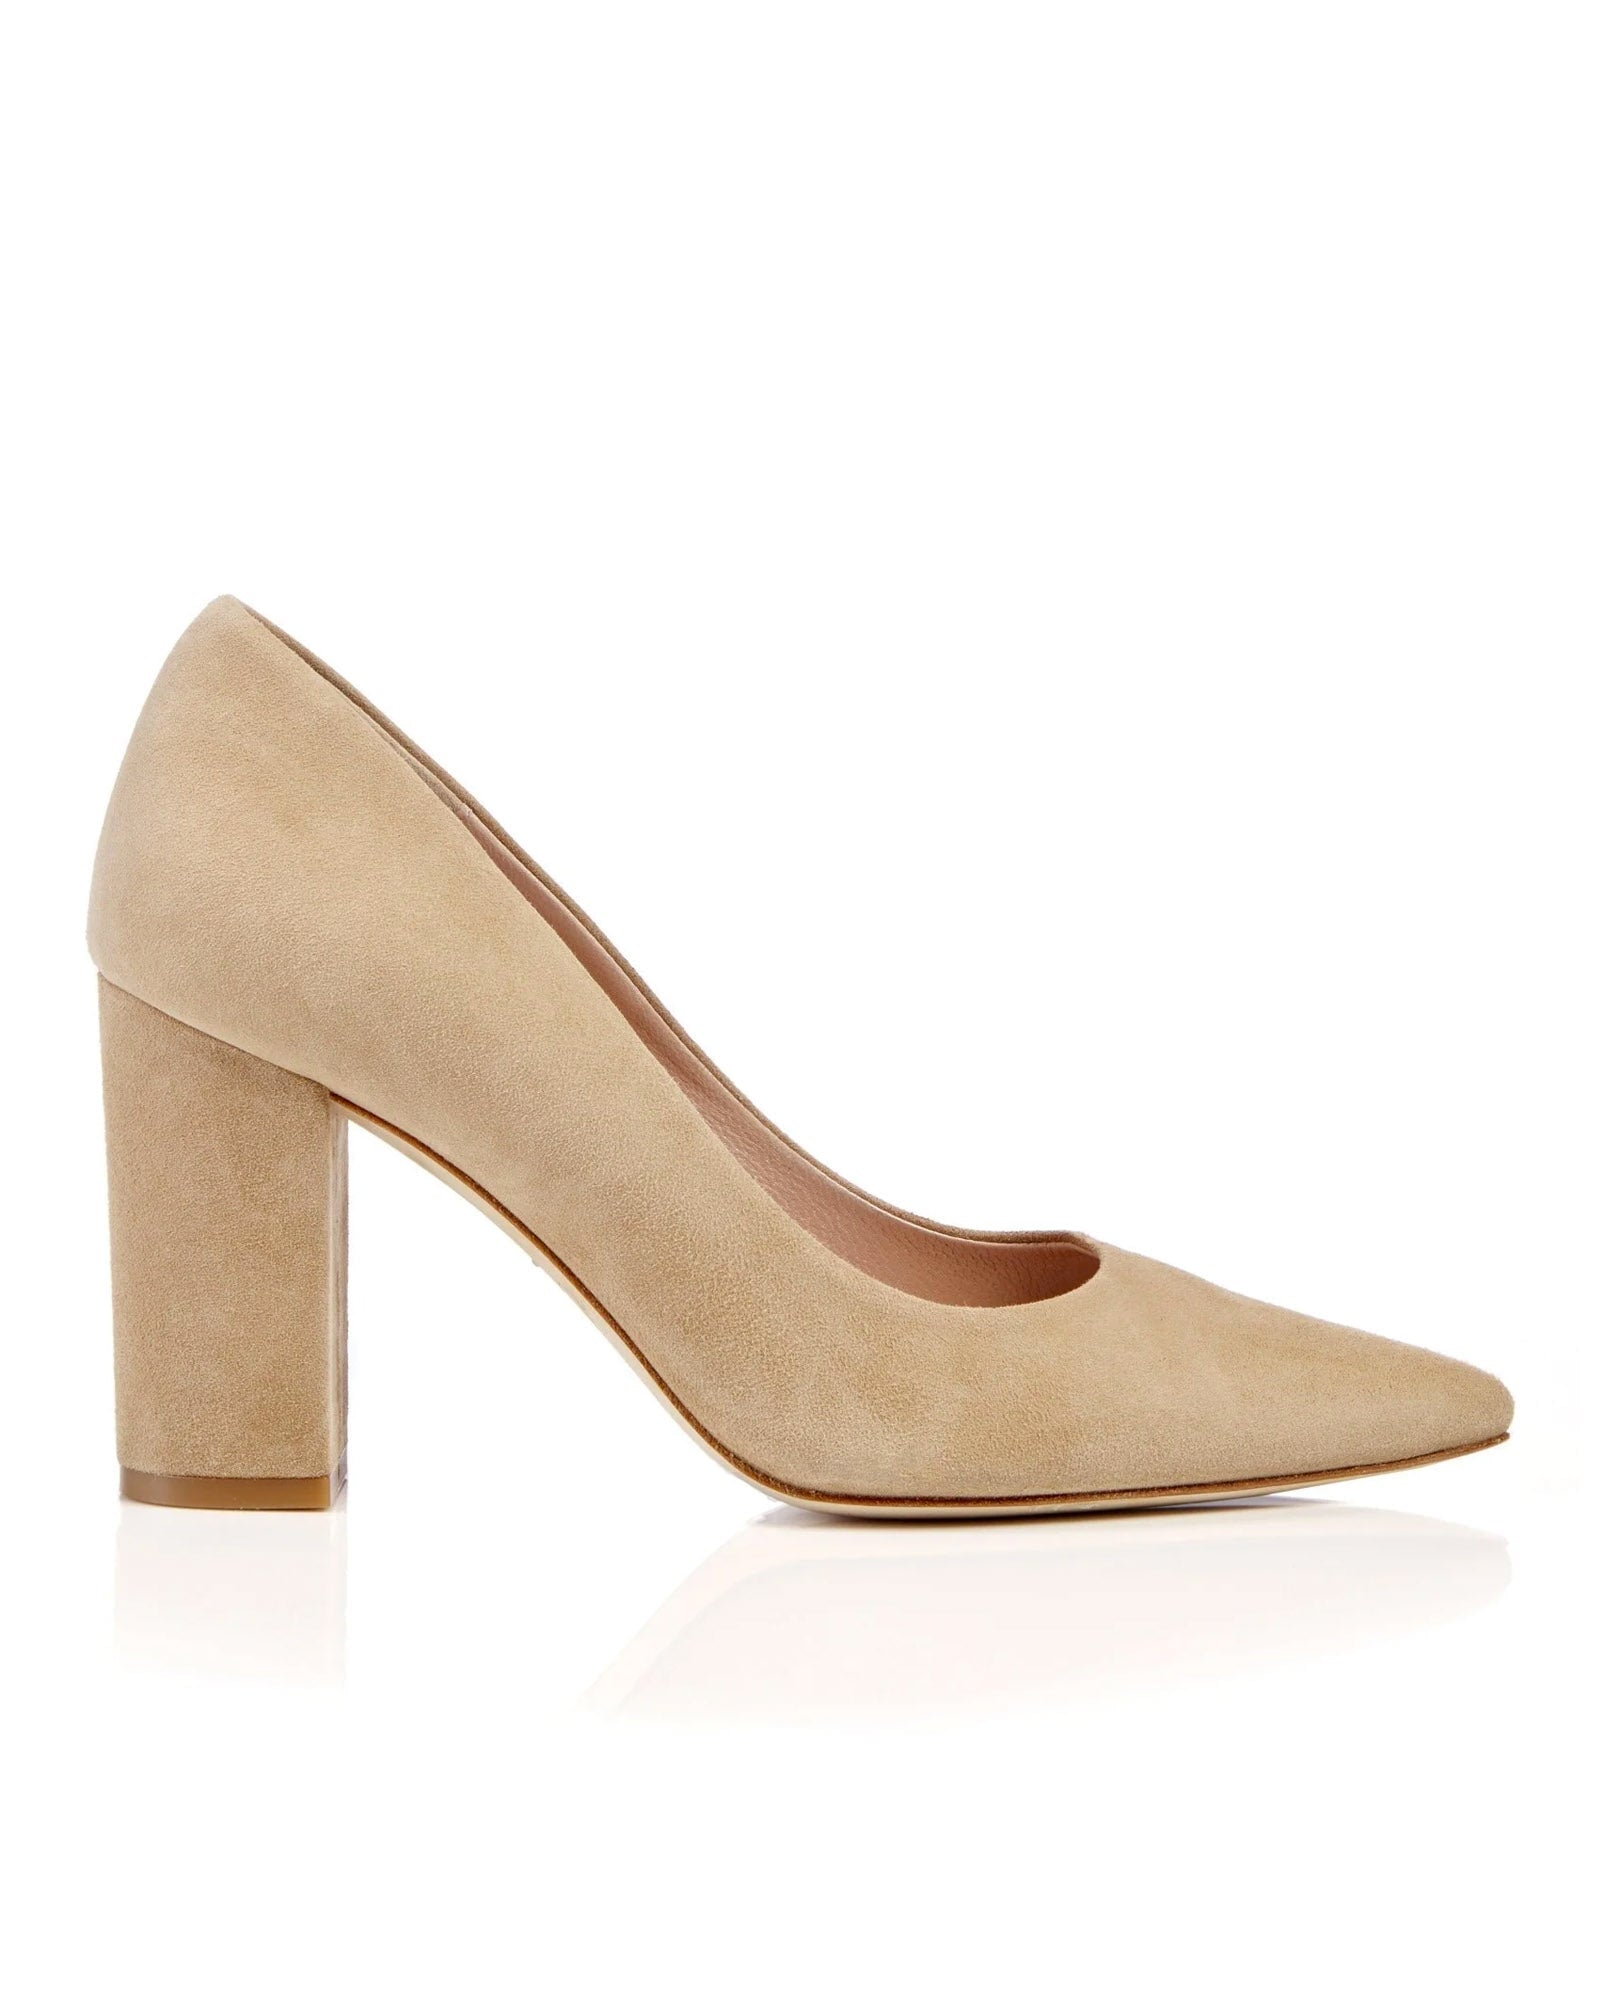 Buy Tan Brown Heeled Shoes for Women by Curiozz Online | Ajio.com